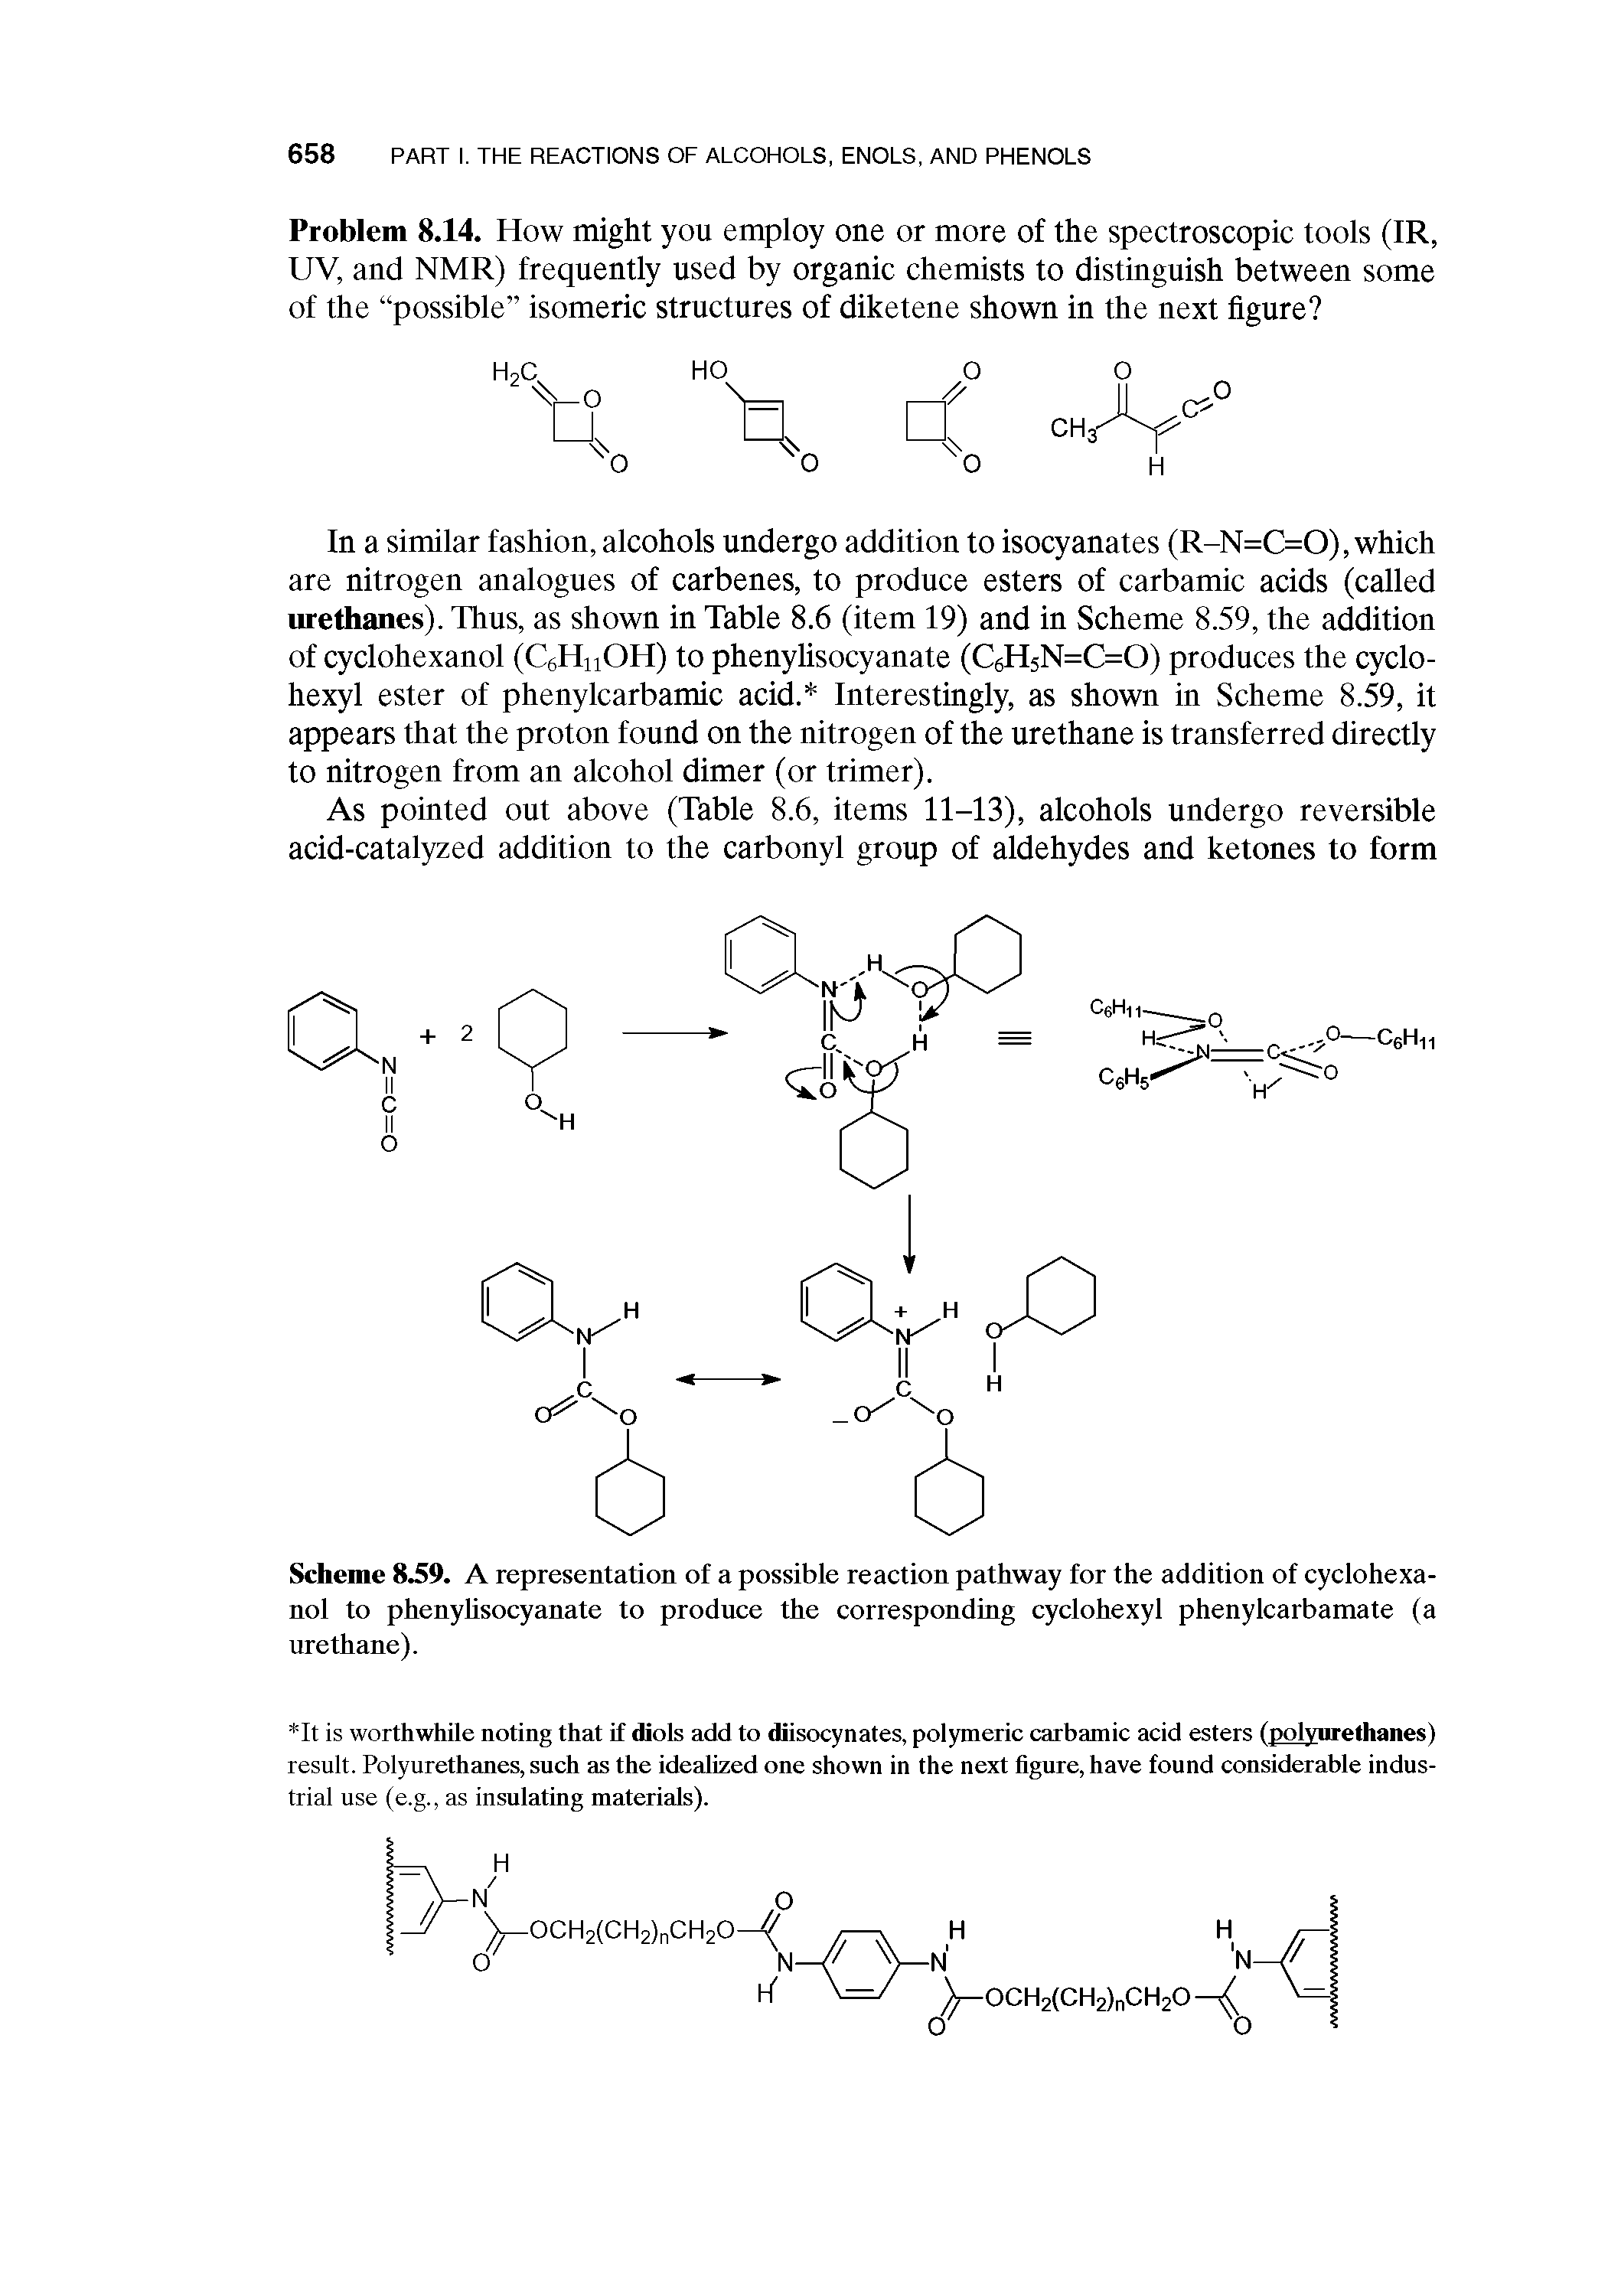 Scheme 8.59. A representation of a possible reaction pathway for the addition of cyclohexanol to phenyhsocyanate to prodnce the corresponding cyclohexyl phenylcarbamate (a urethane).